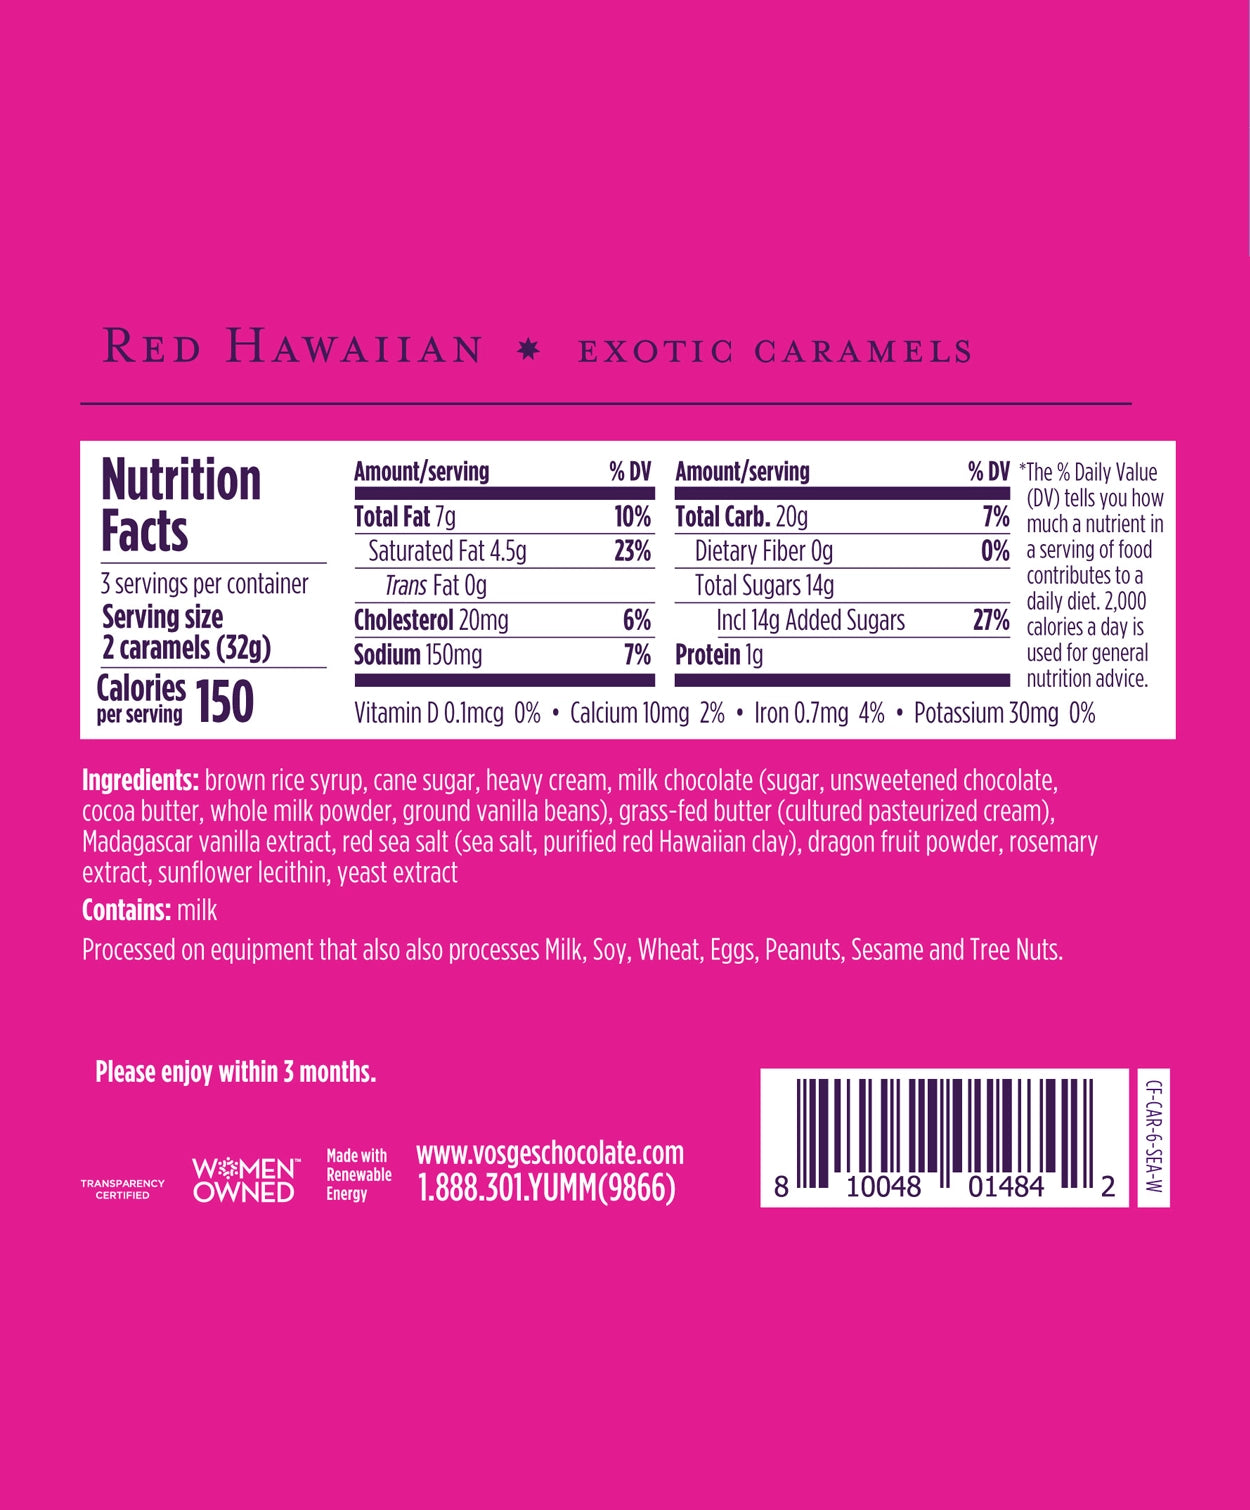 Nutrition Facts and Ingredients of Vosges Haut-Chocolat Red Hawaiian Exotic Caramels in white, san-serif font on a bright pink background.